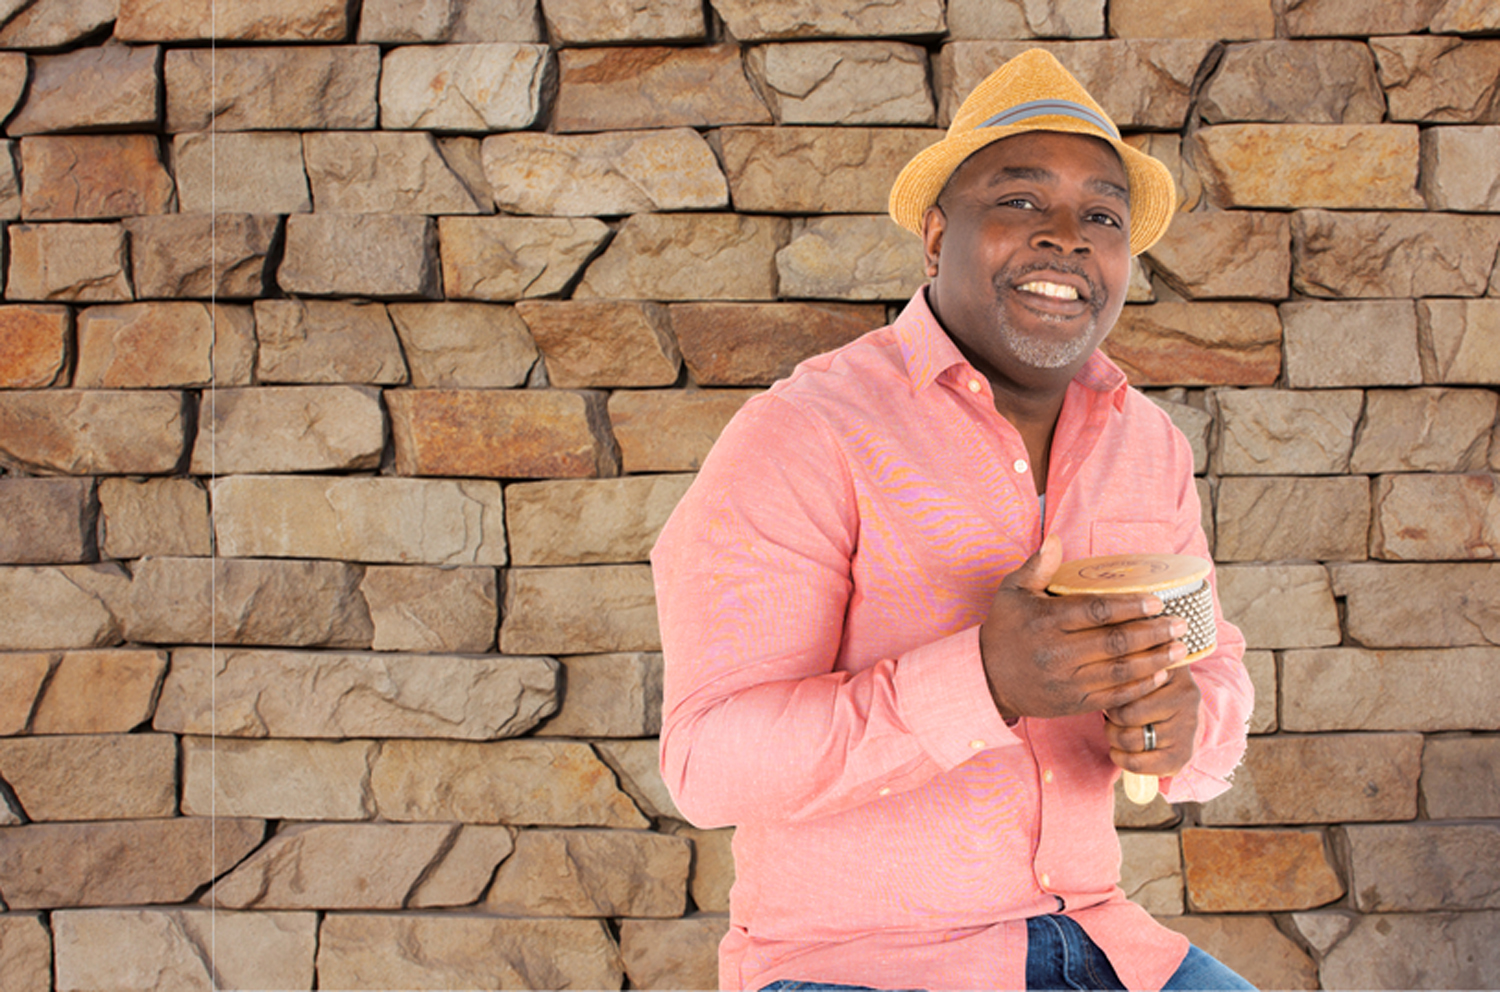 a man in a peach colored shirt and a hat plays a cabasa